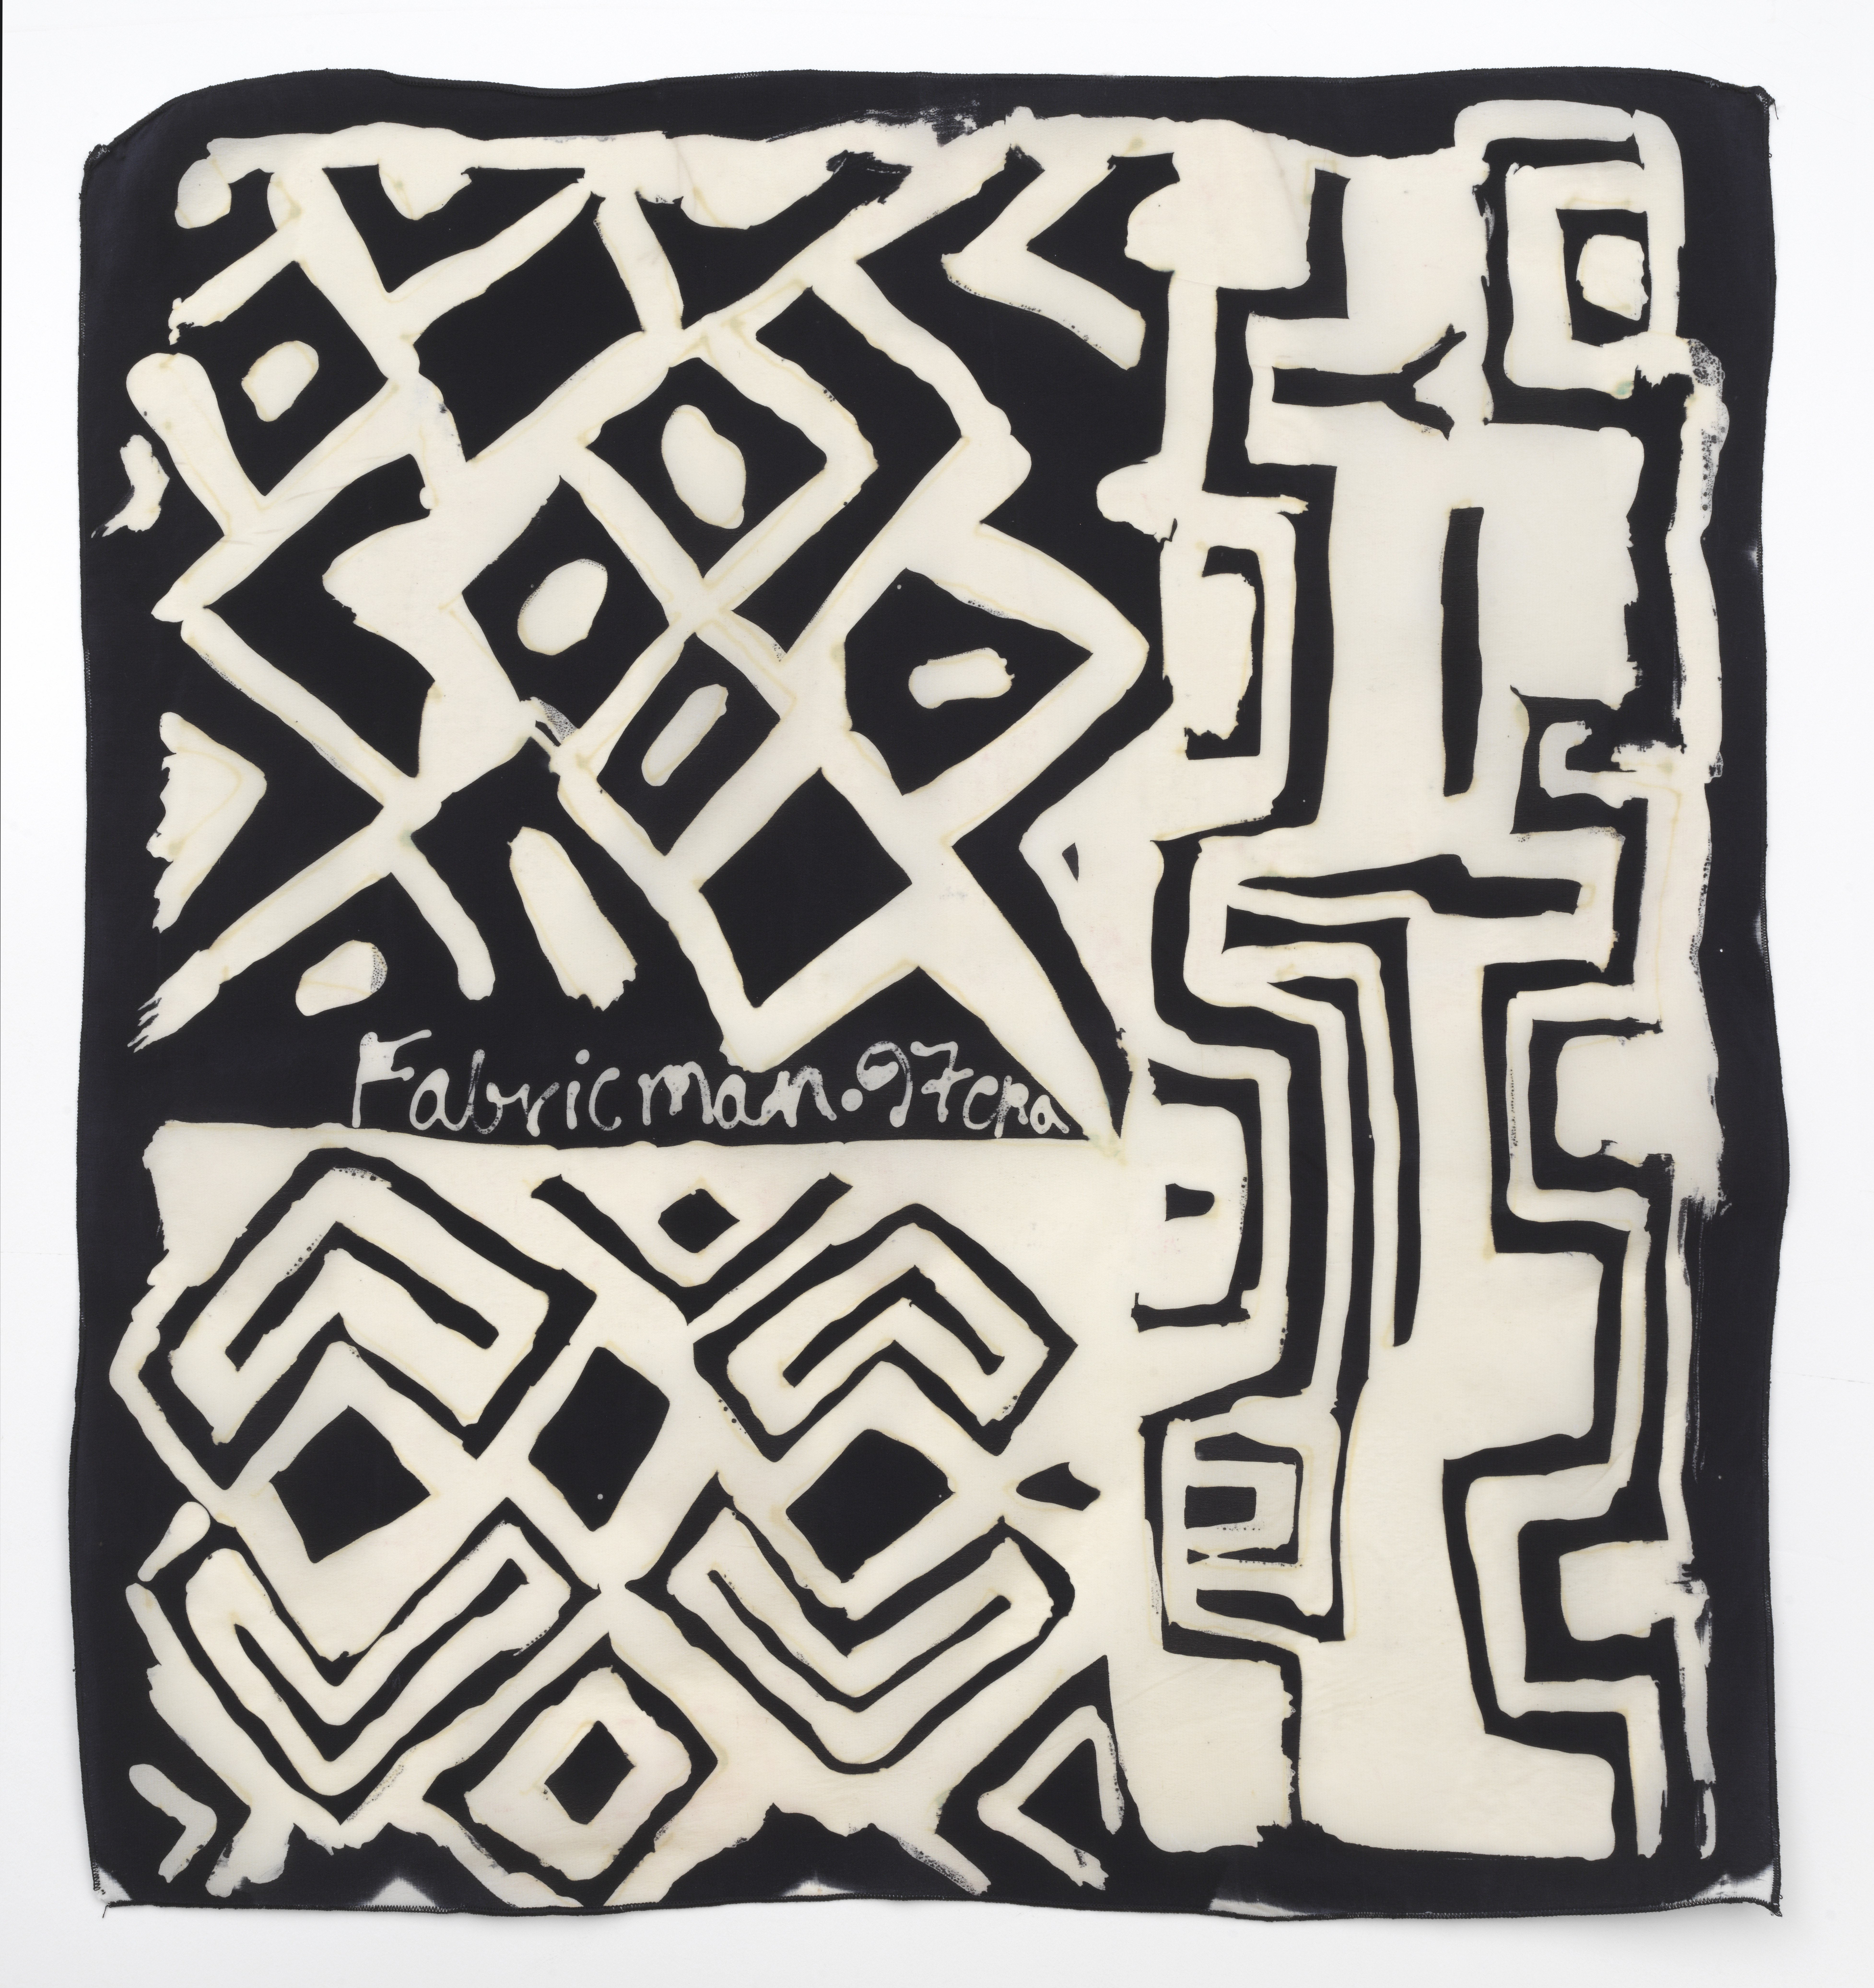 A square textile featuring a black and white angular pattern and the text "fabricman 97."